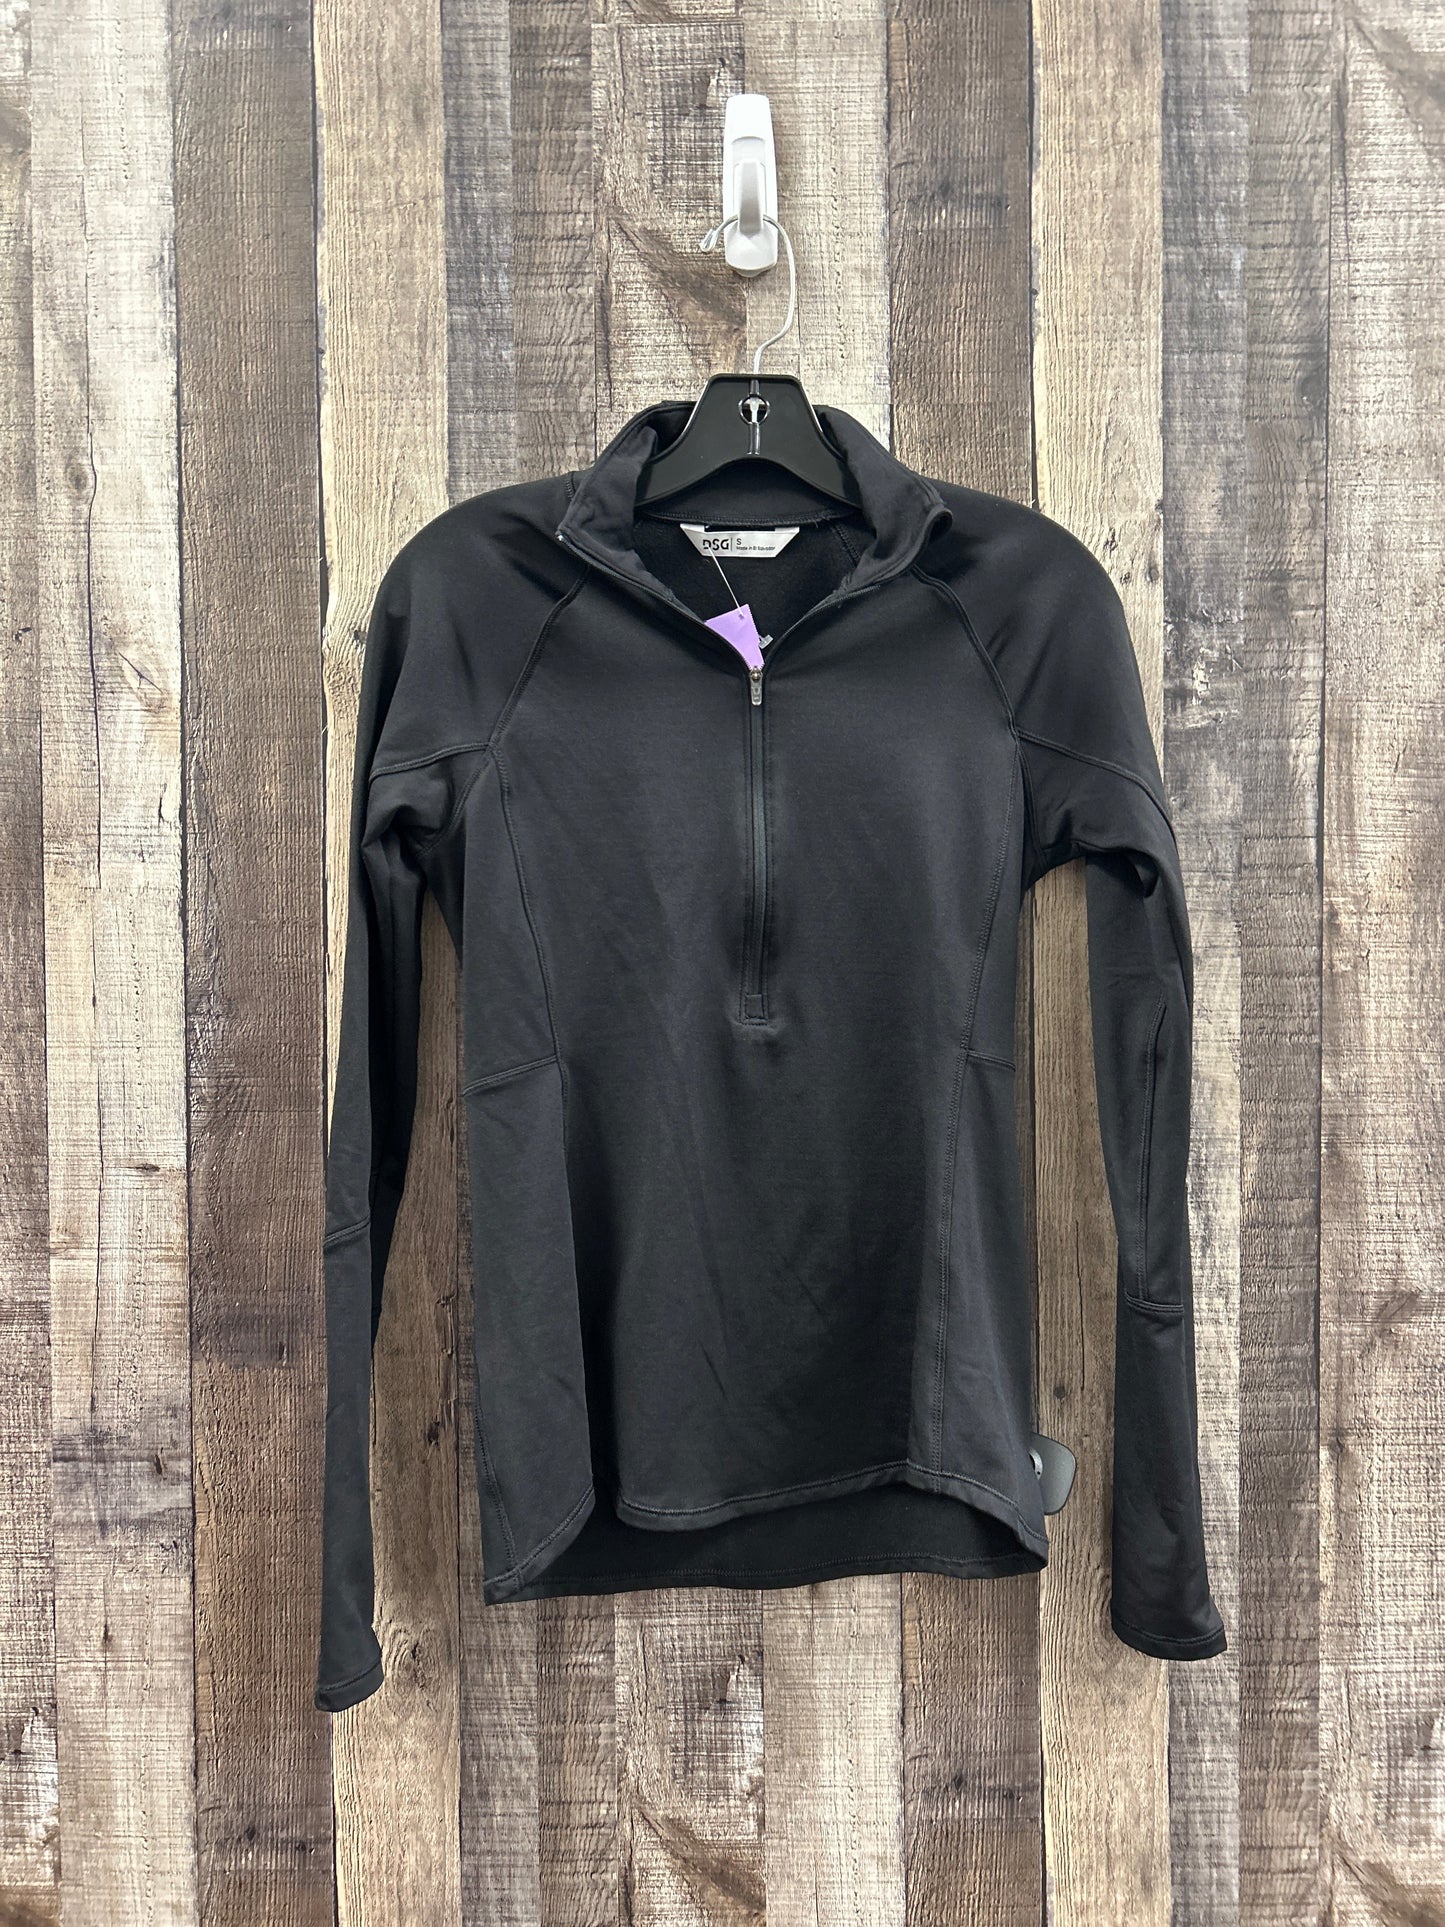 Black Athletic Top Long Sleeve Collar Dsg Outerwear, Size Xl